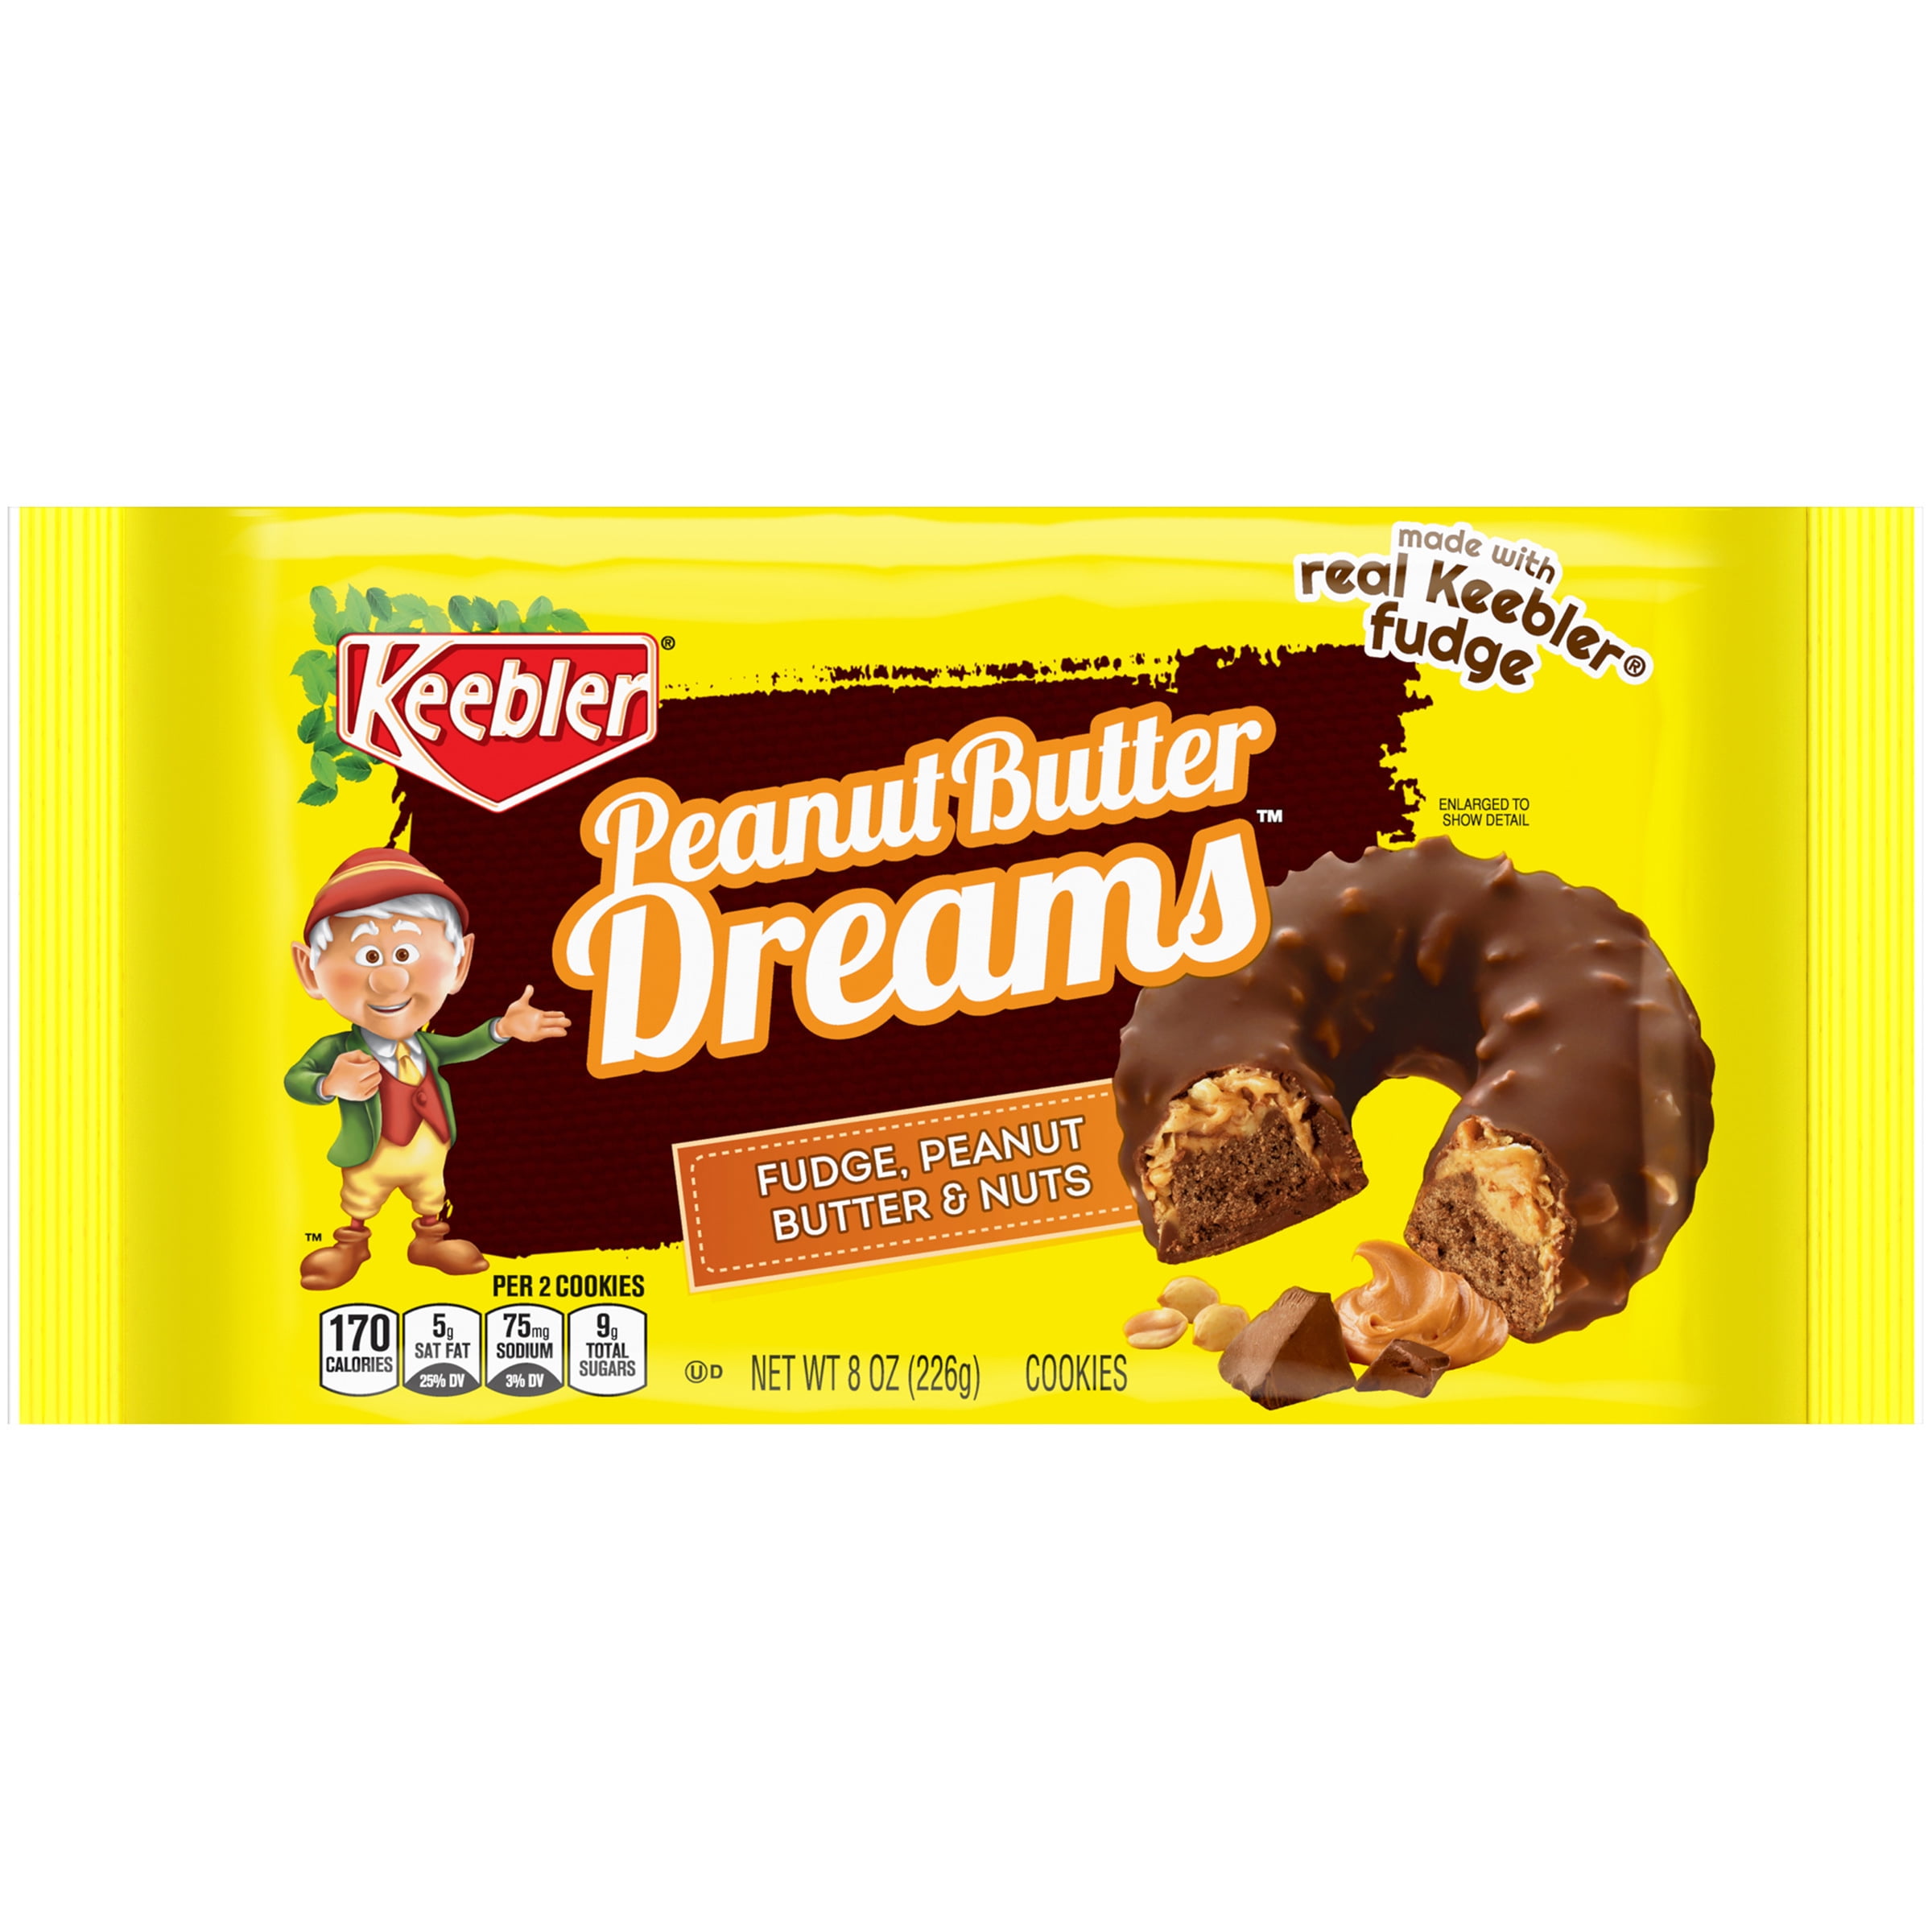 Photo 1 of 5 pack Keebler Peanut Butter Dreams Cookies - 8oz best by may 2021